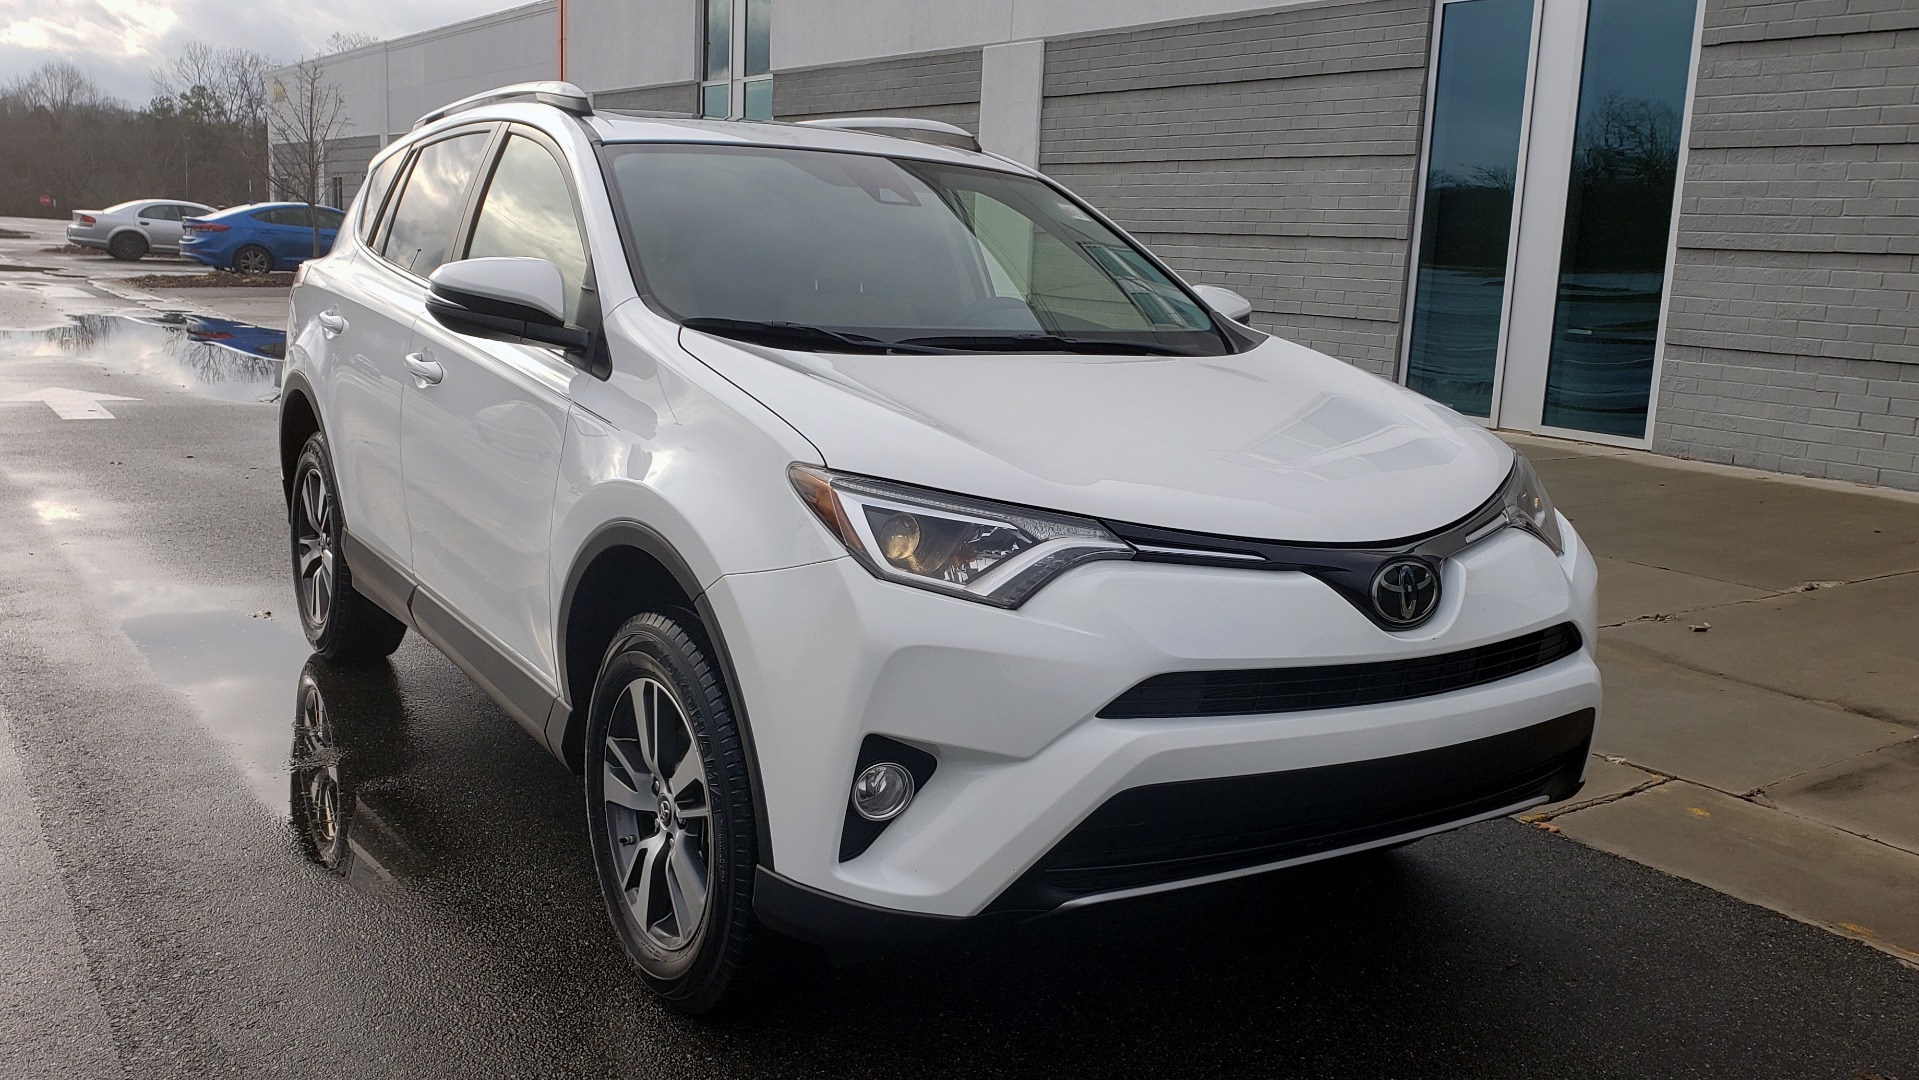 Used 2018 Toyota RAV4 XLE / FWD / 4-CYL / 6-SPD AUTO / BSM / REAR CROSS TRAFFIC ALERT for sale Sold at Formula Imports in Charlotte NC 28227 7